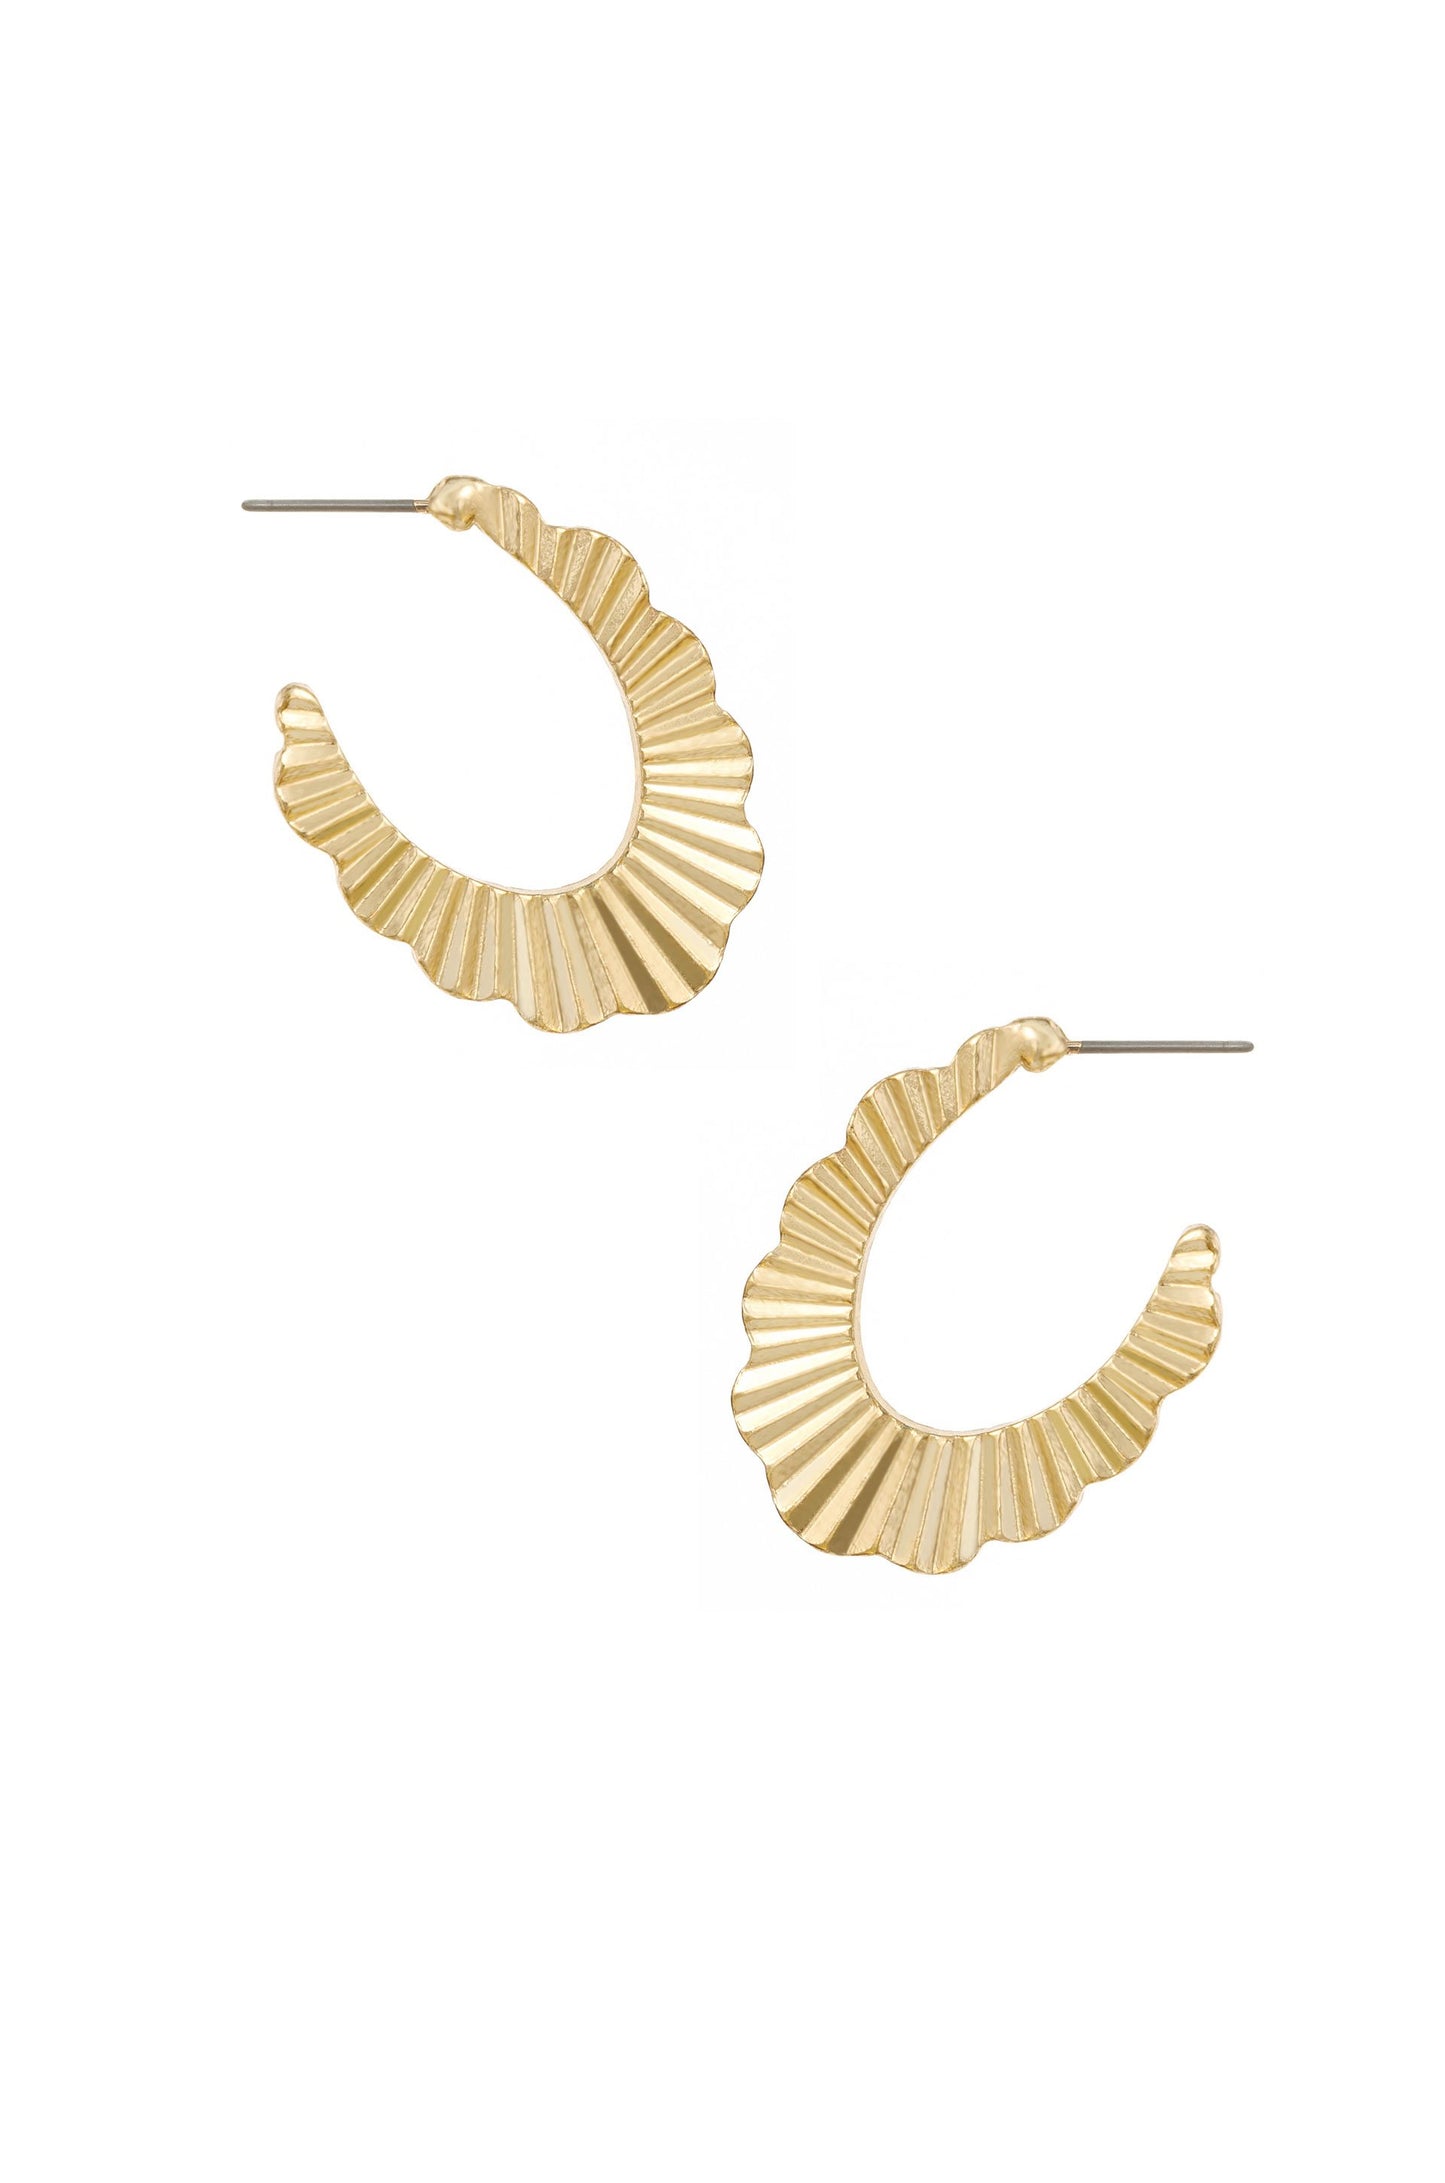 Textured Relics 18k Gold Plated Hoop Earrings on white background